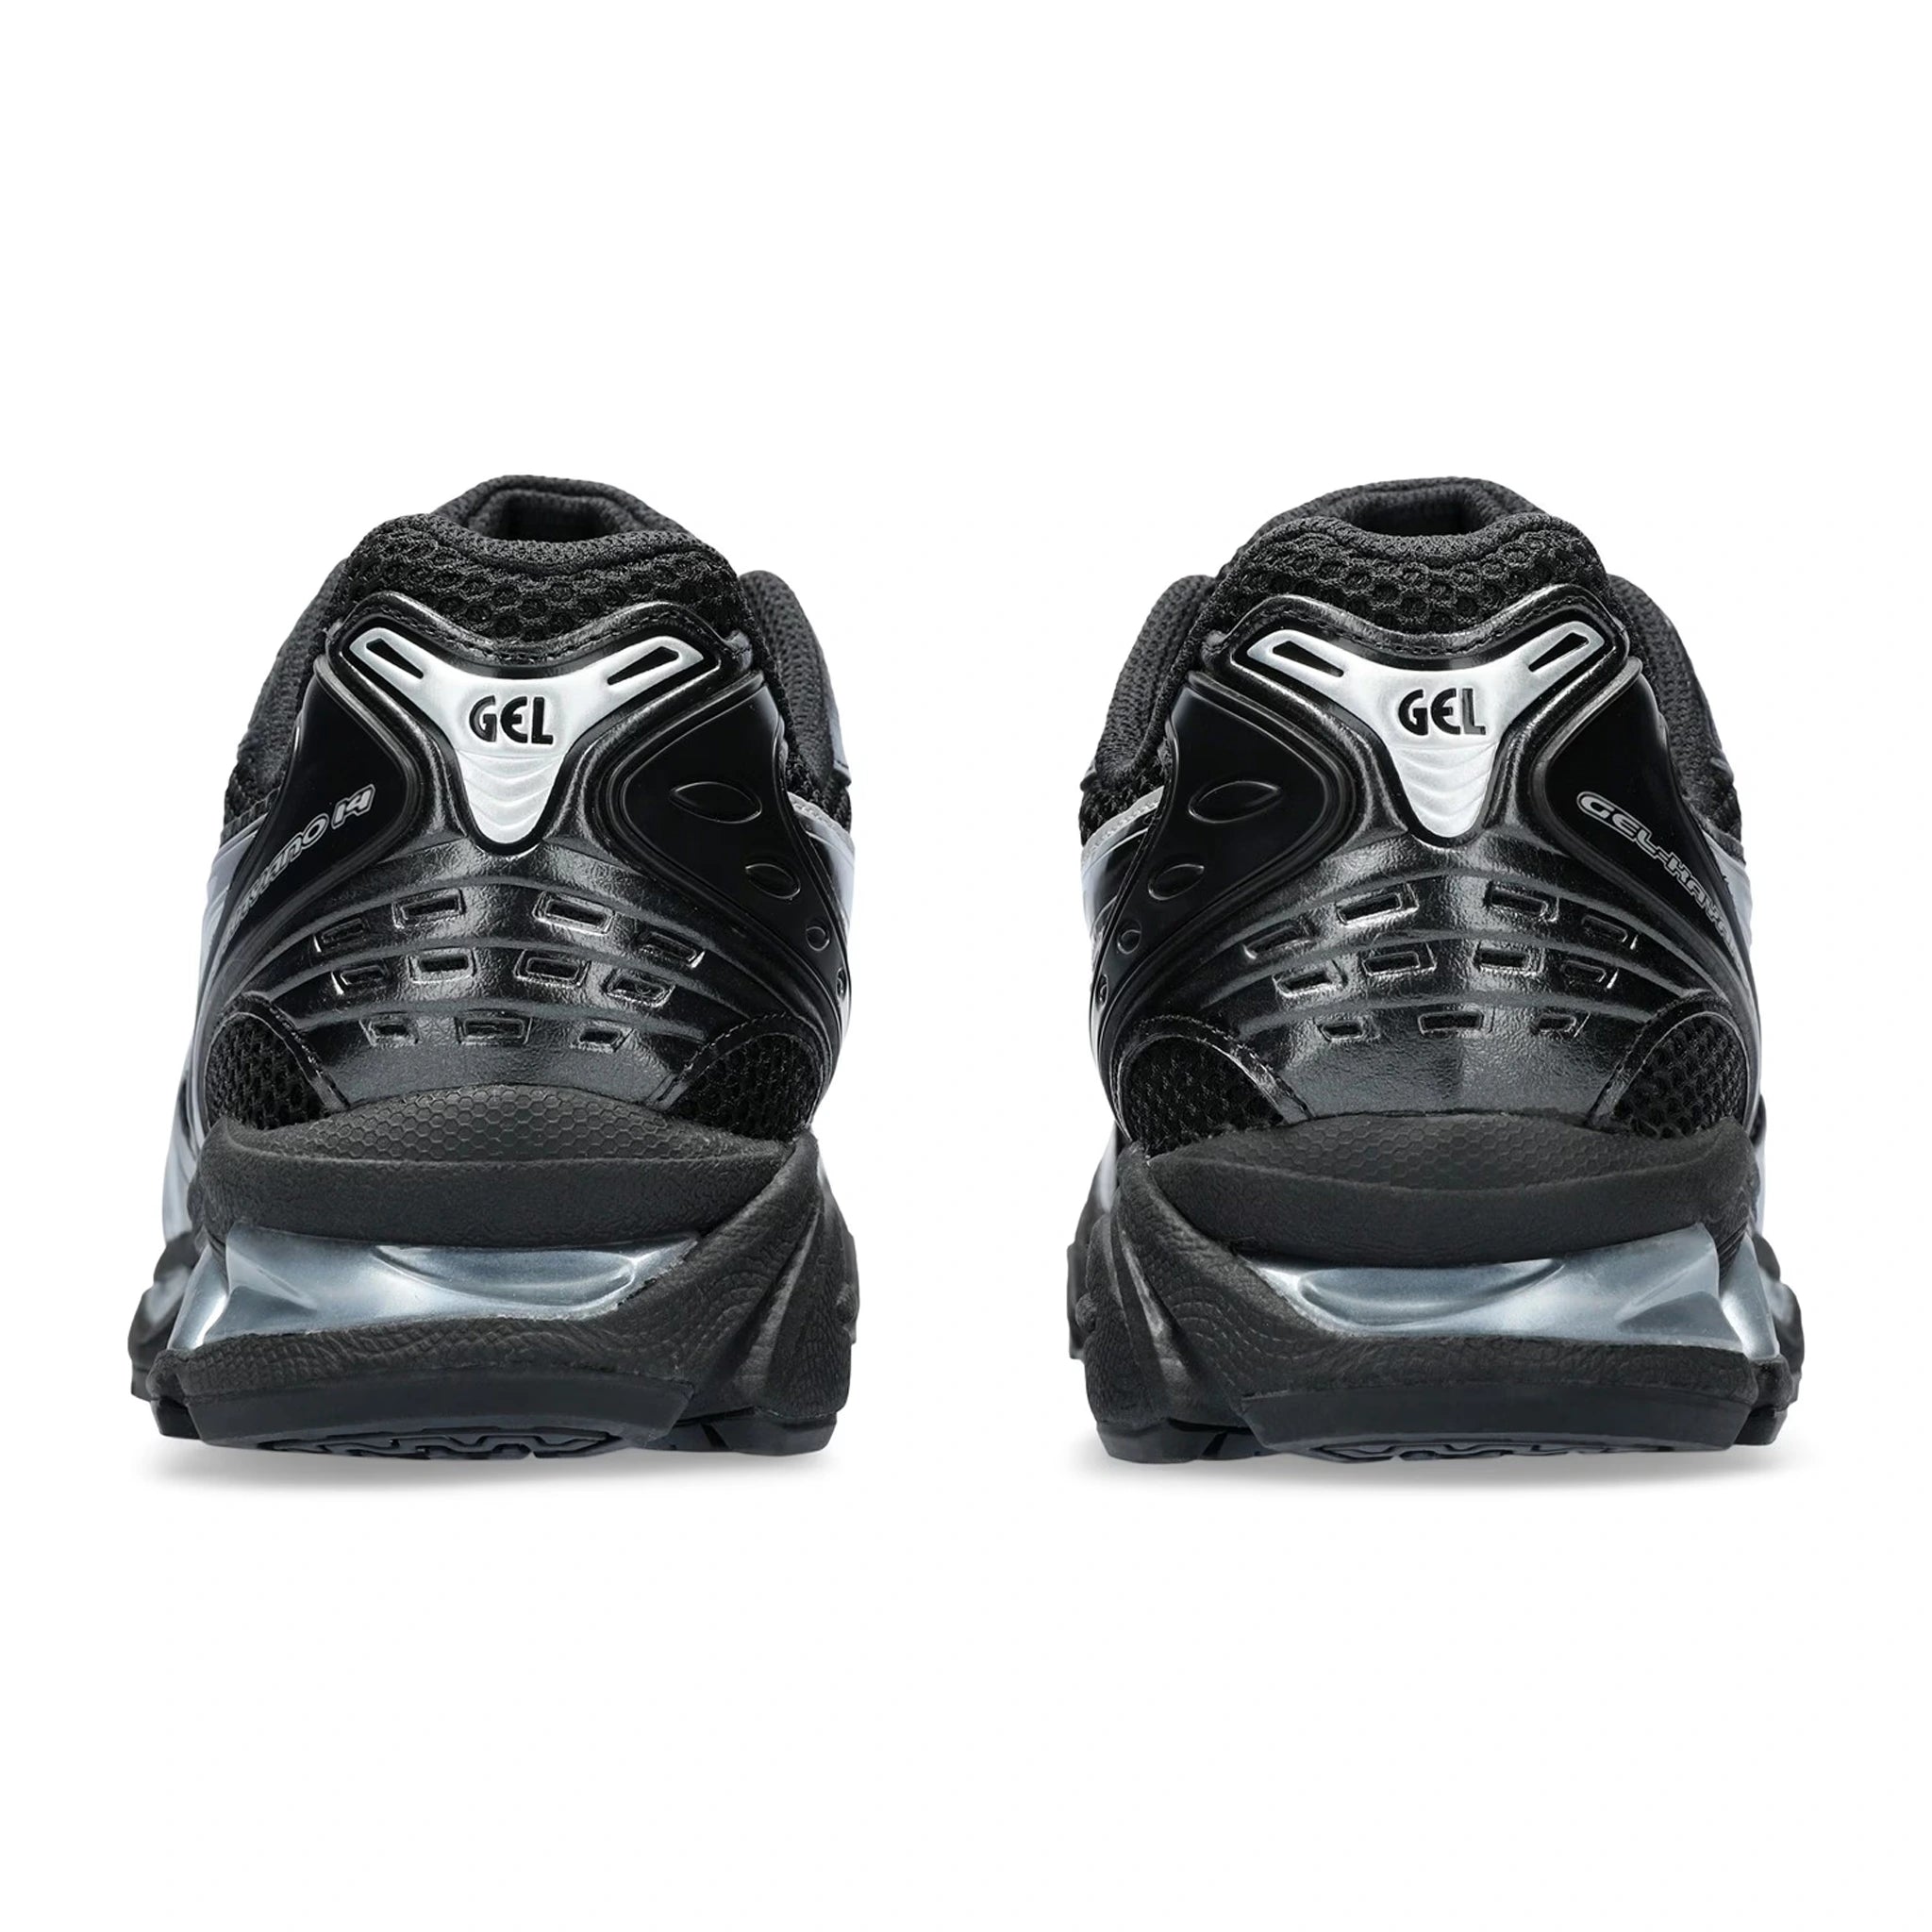 Back view of ASICS Gel-Kayano 14 Black Silver 1201A019-006